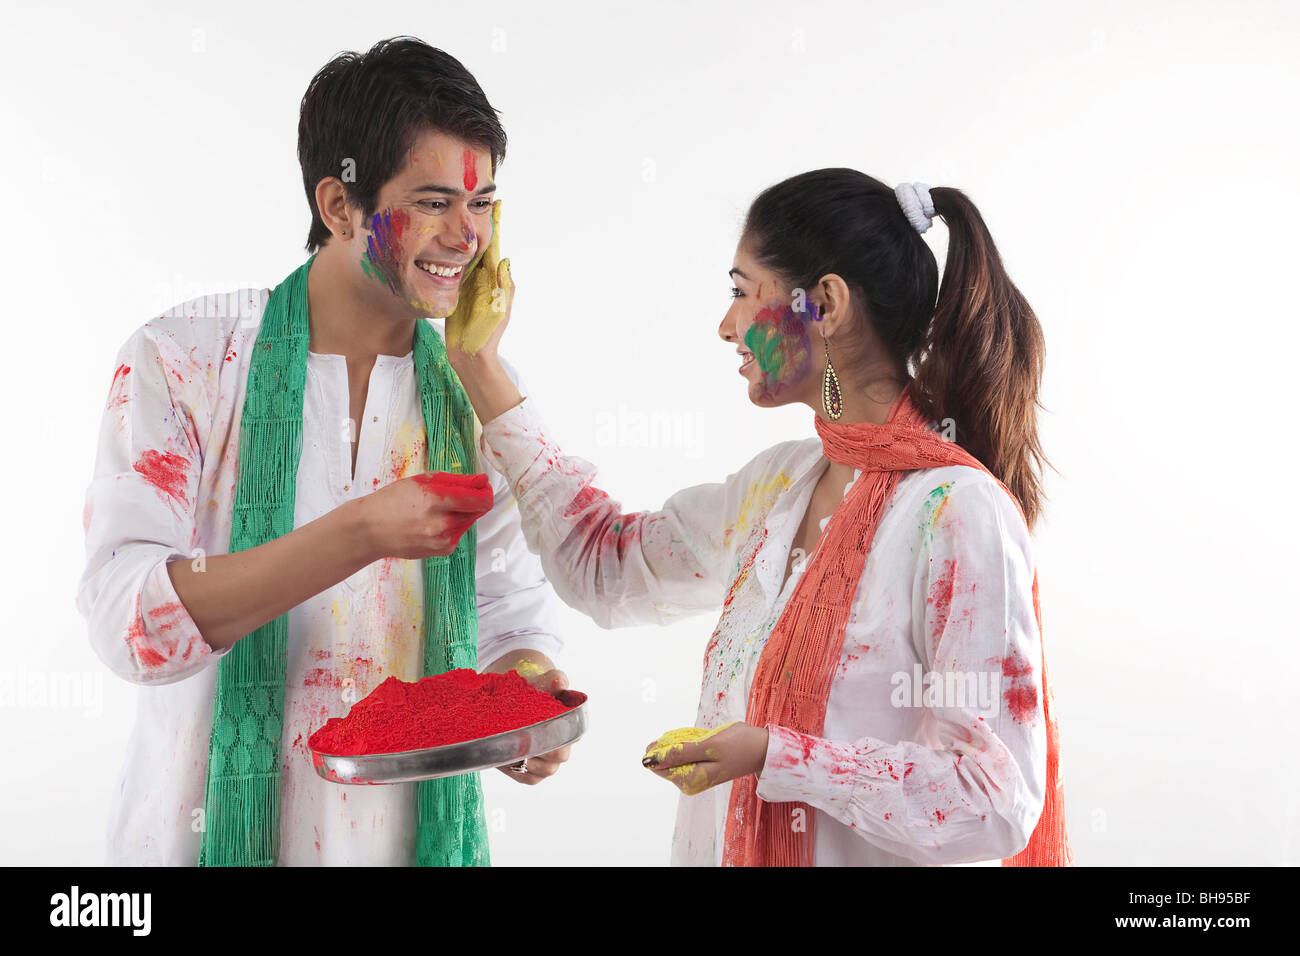 Woman putting colour on a man's face Stock Photo